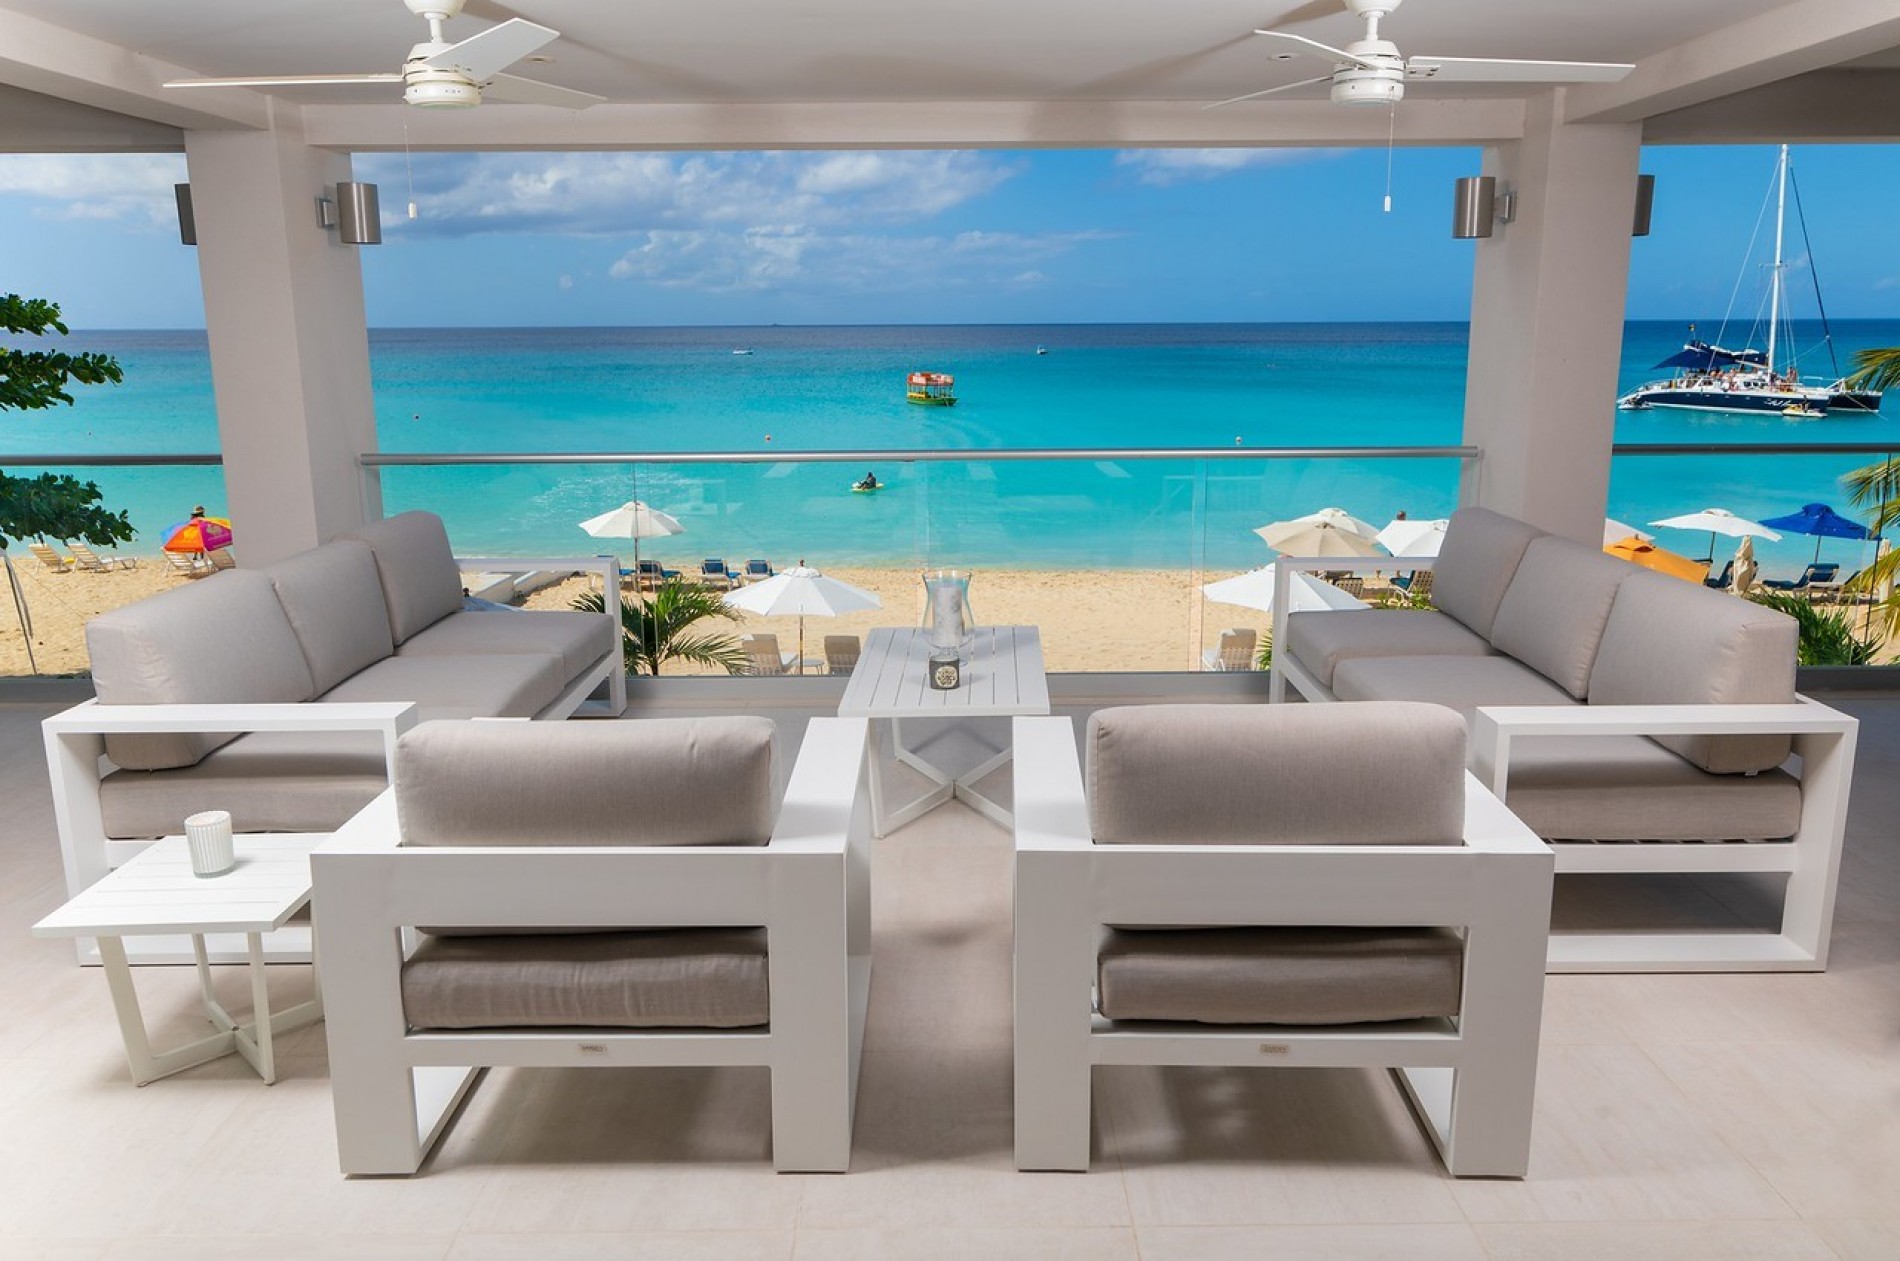 The One at the St James | Paynes Bay | Barbados Villas